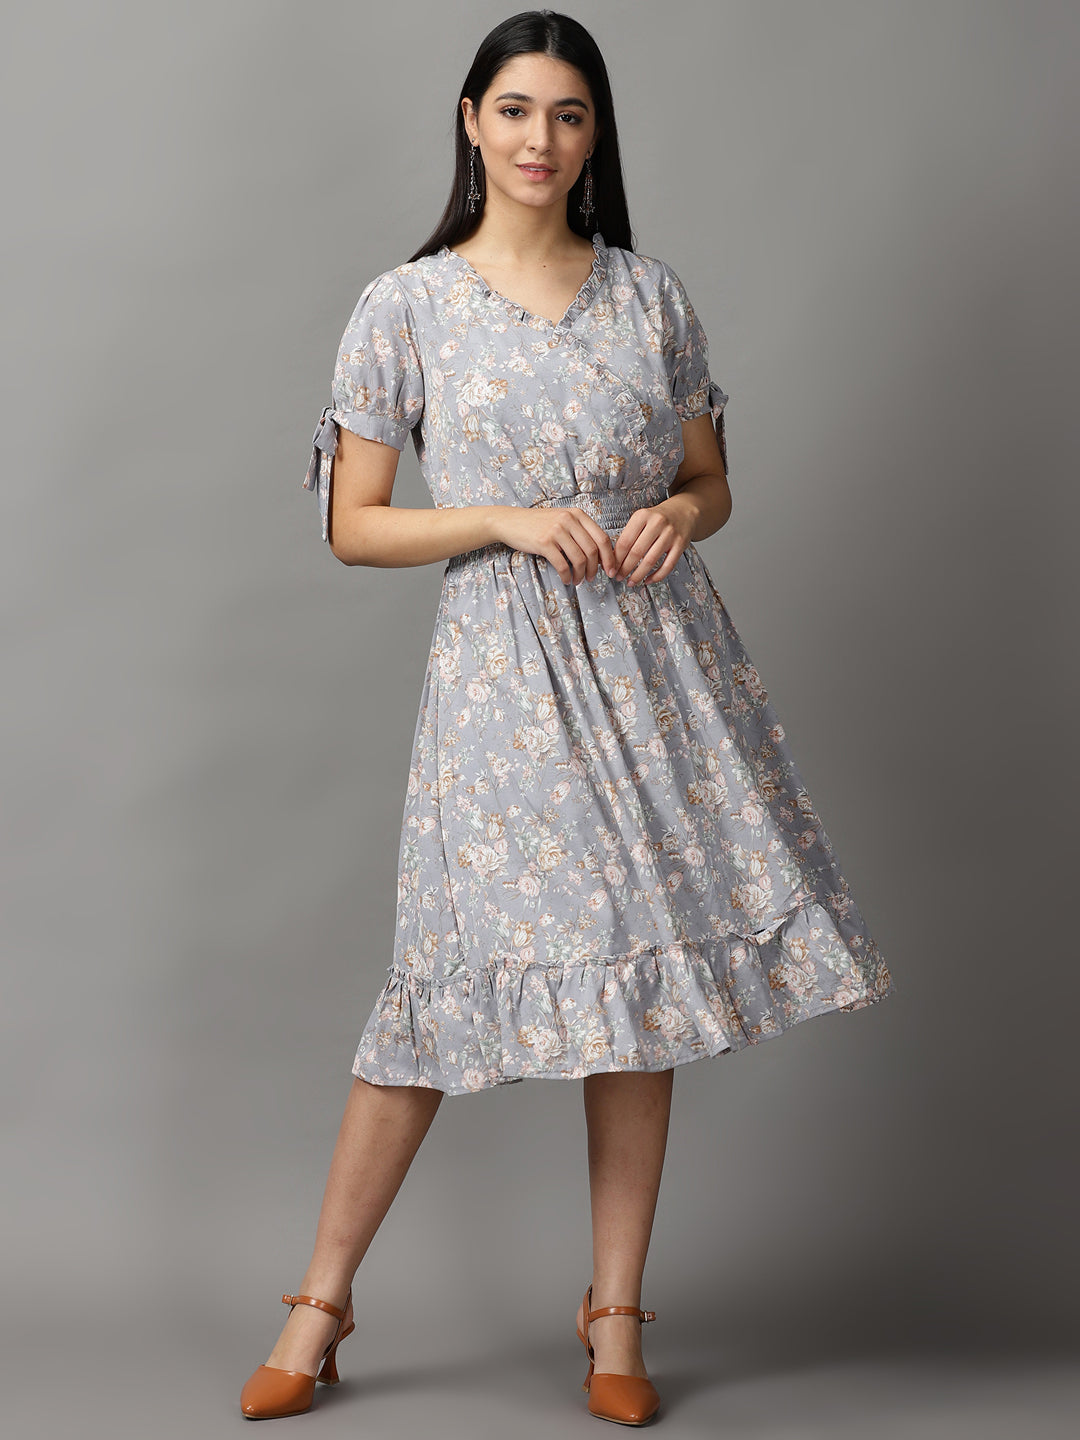 Women's Grey Floral Fit and Flare Dress